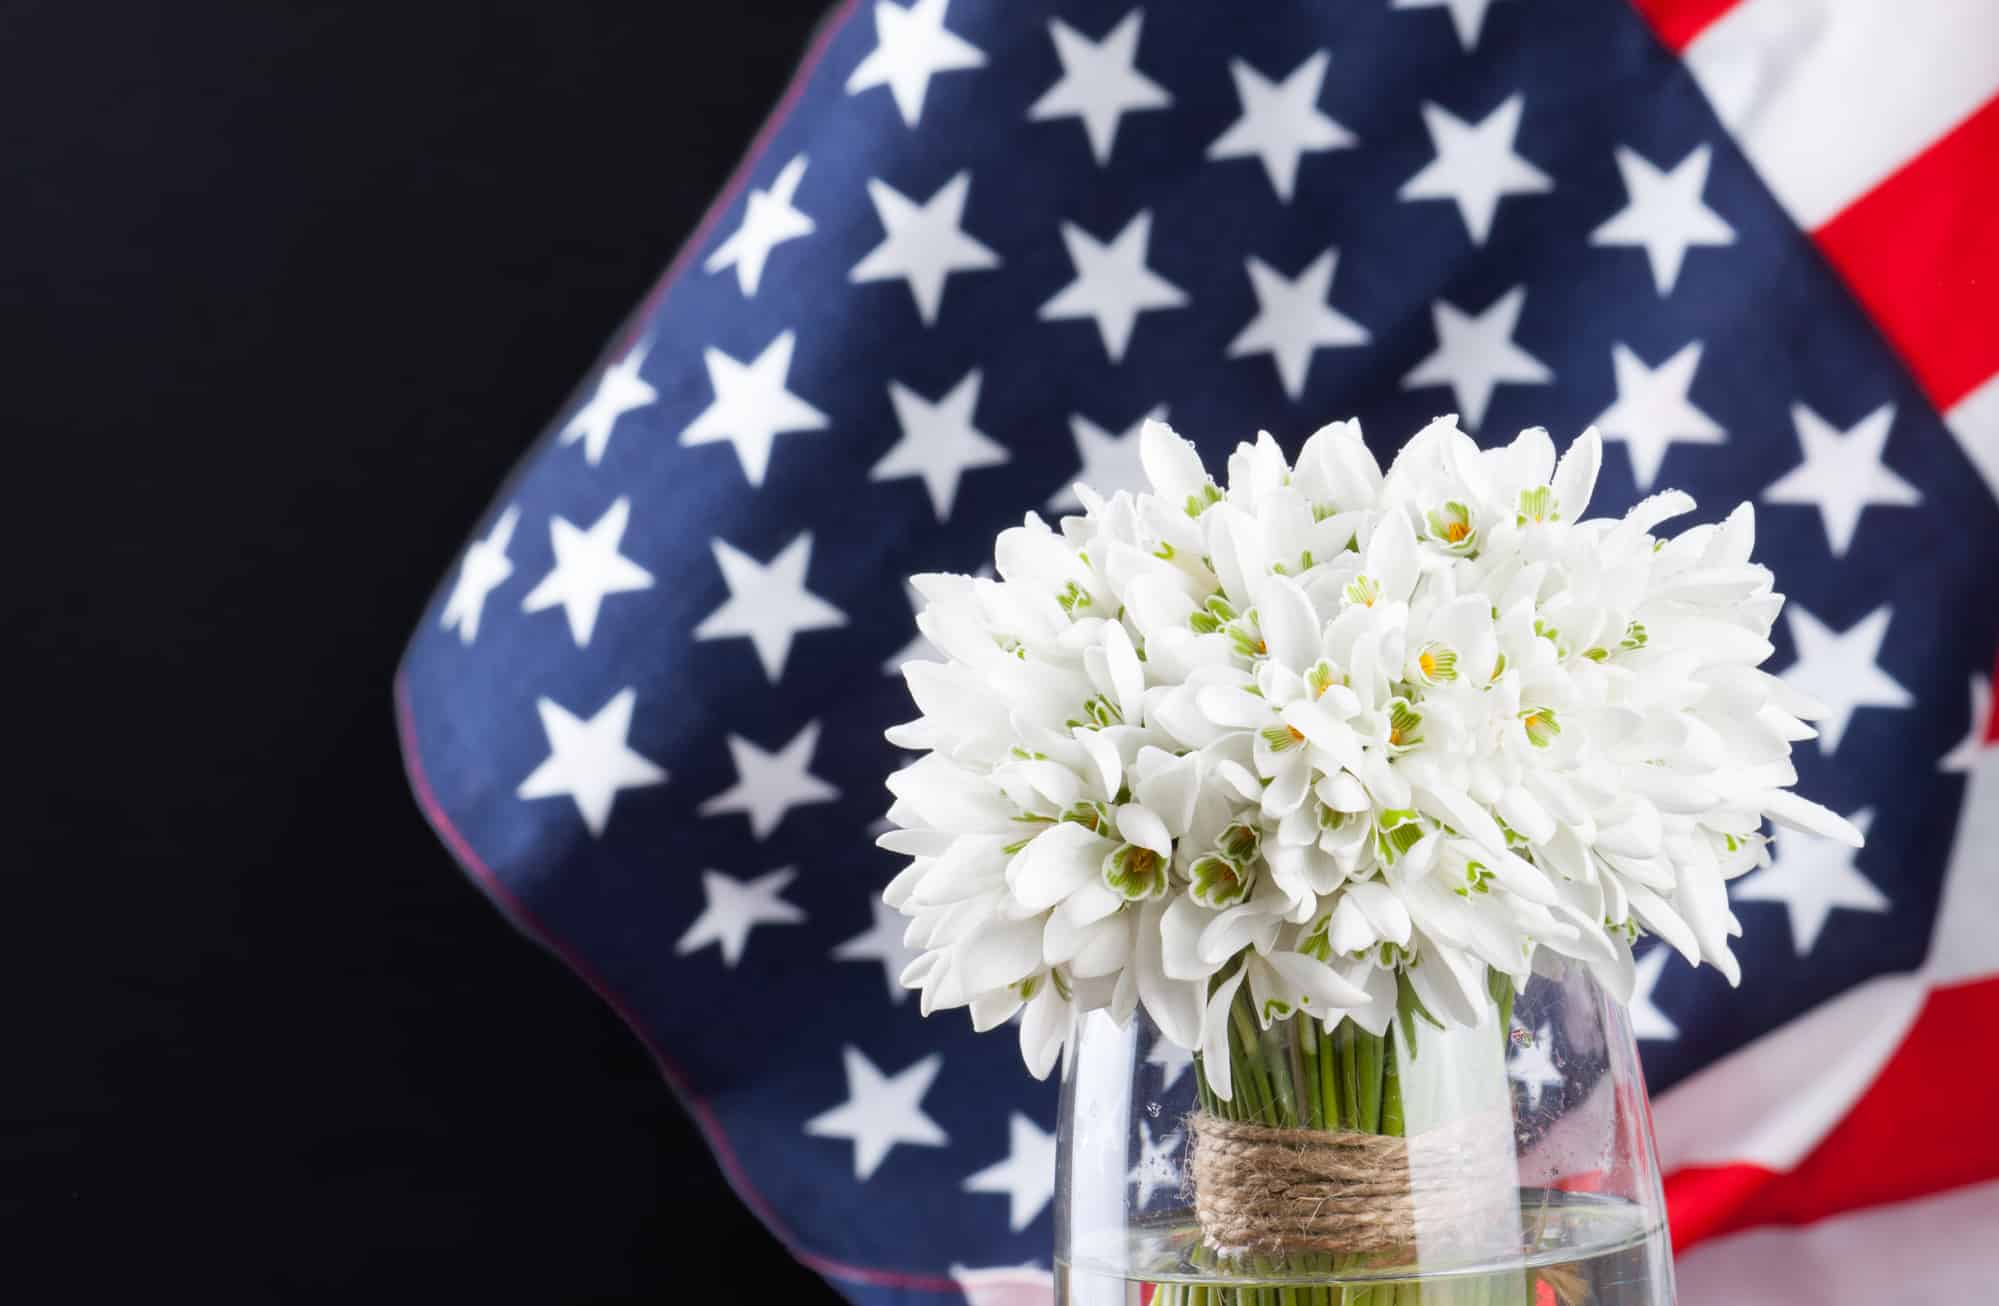 Bussey’s Florist has wonderful, fresh and memorable flowers and plants as gifts to honor Veterans Day on November 11th